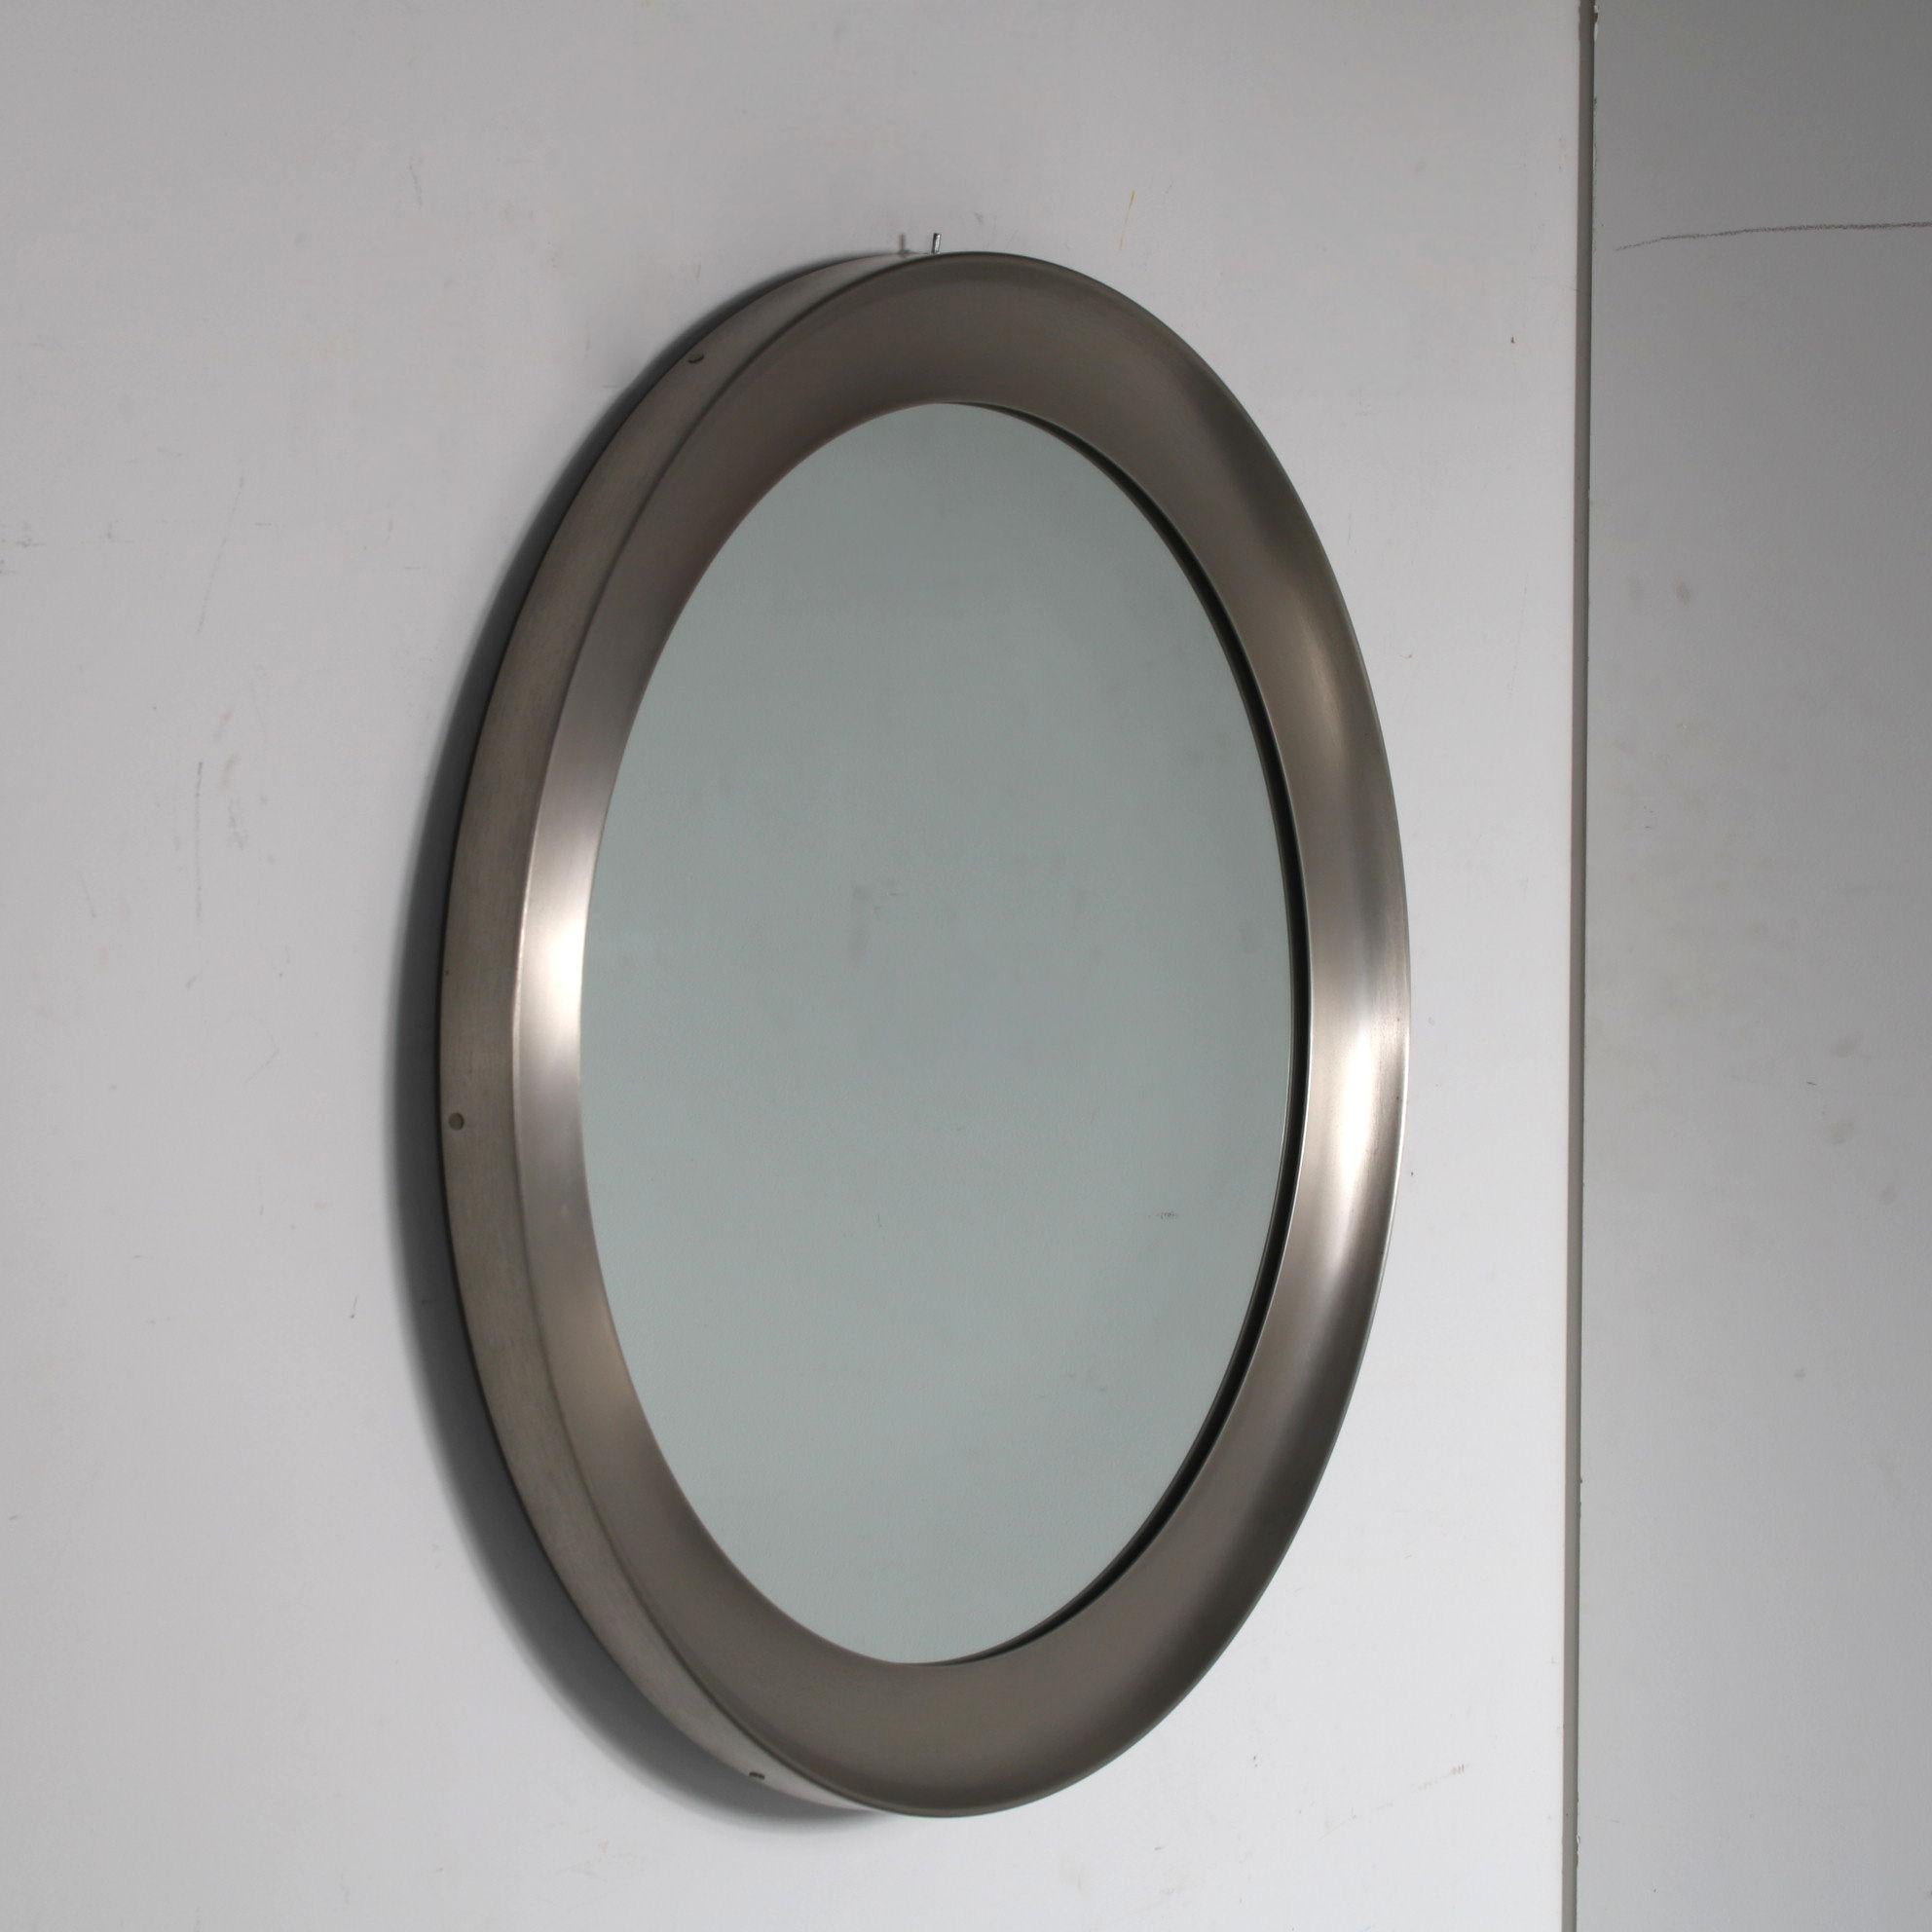 A beautiful and iconic mirror designed by Sergio Mazza, manufactured by Artemide in Italy around 1950.

“Narciso” is the model name of this eye-catching piece. It has a big round shape and aluminium edge, which gives the piece a very nice modern